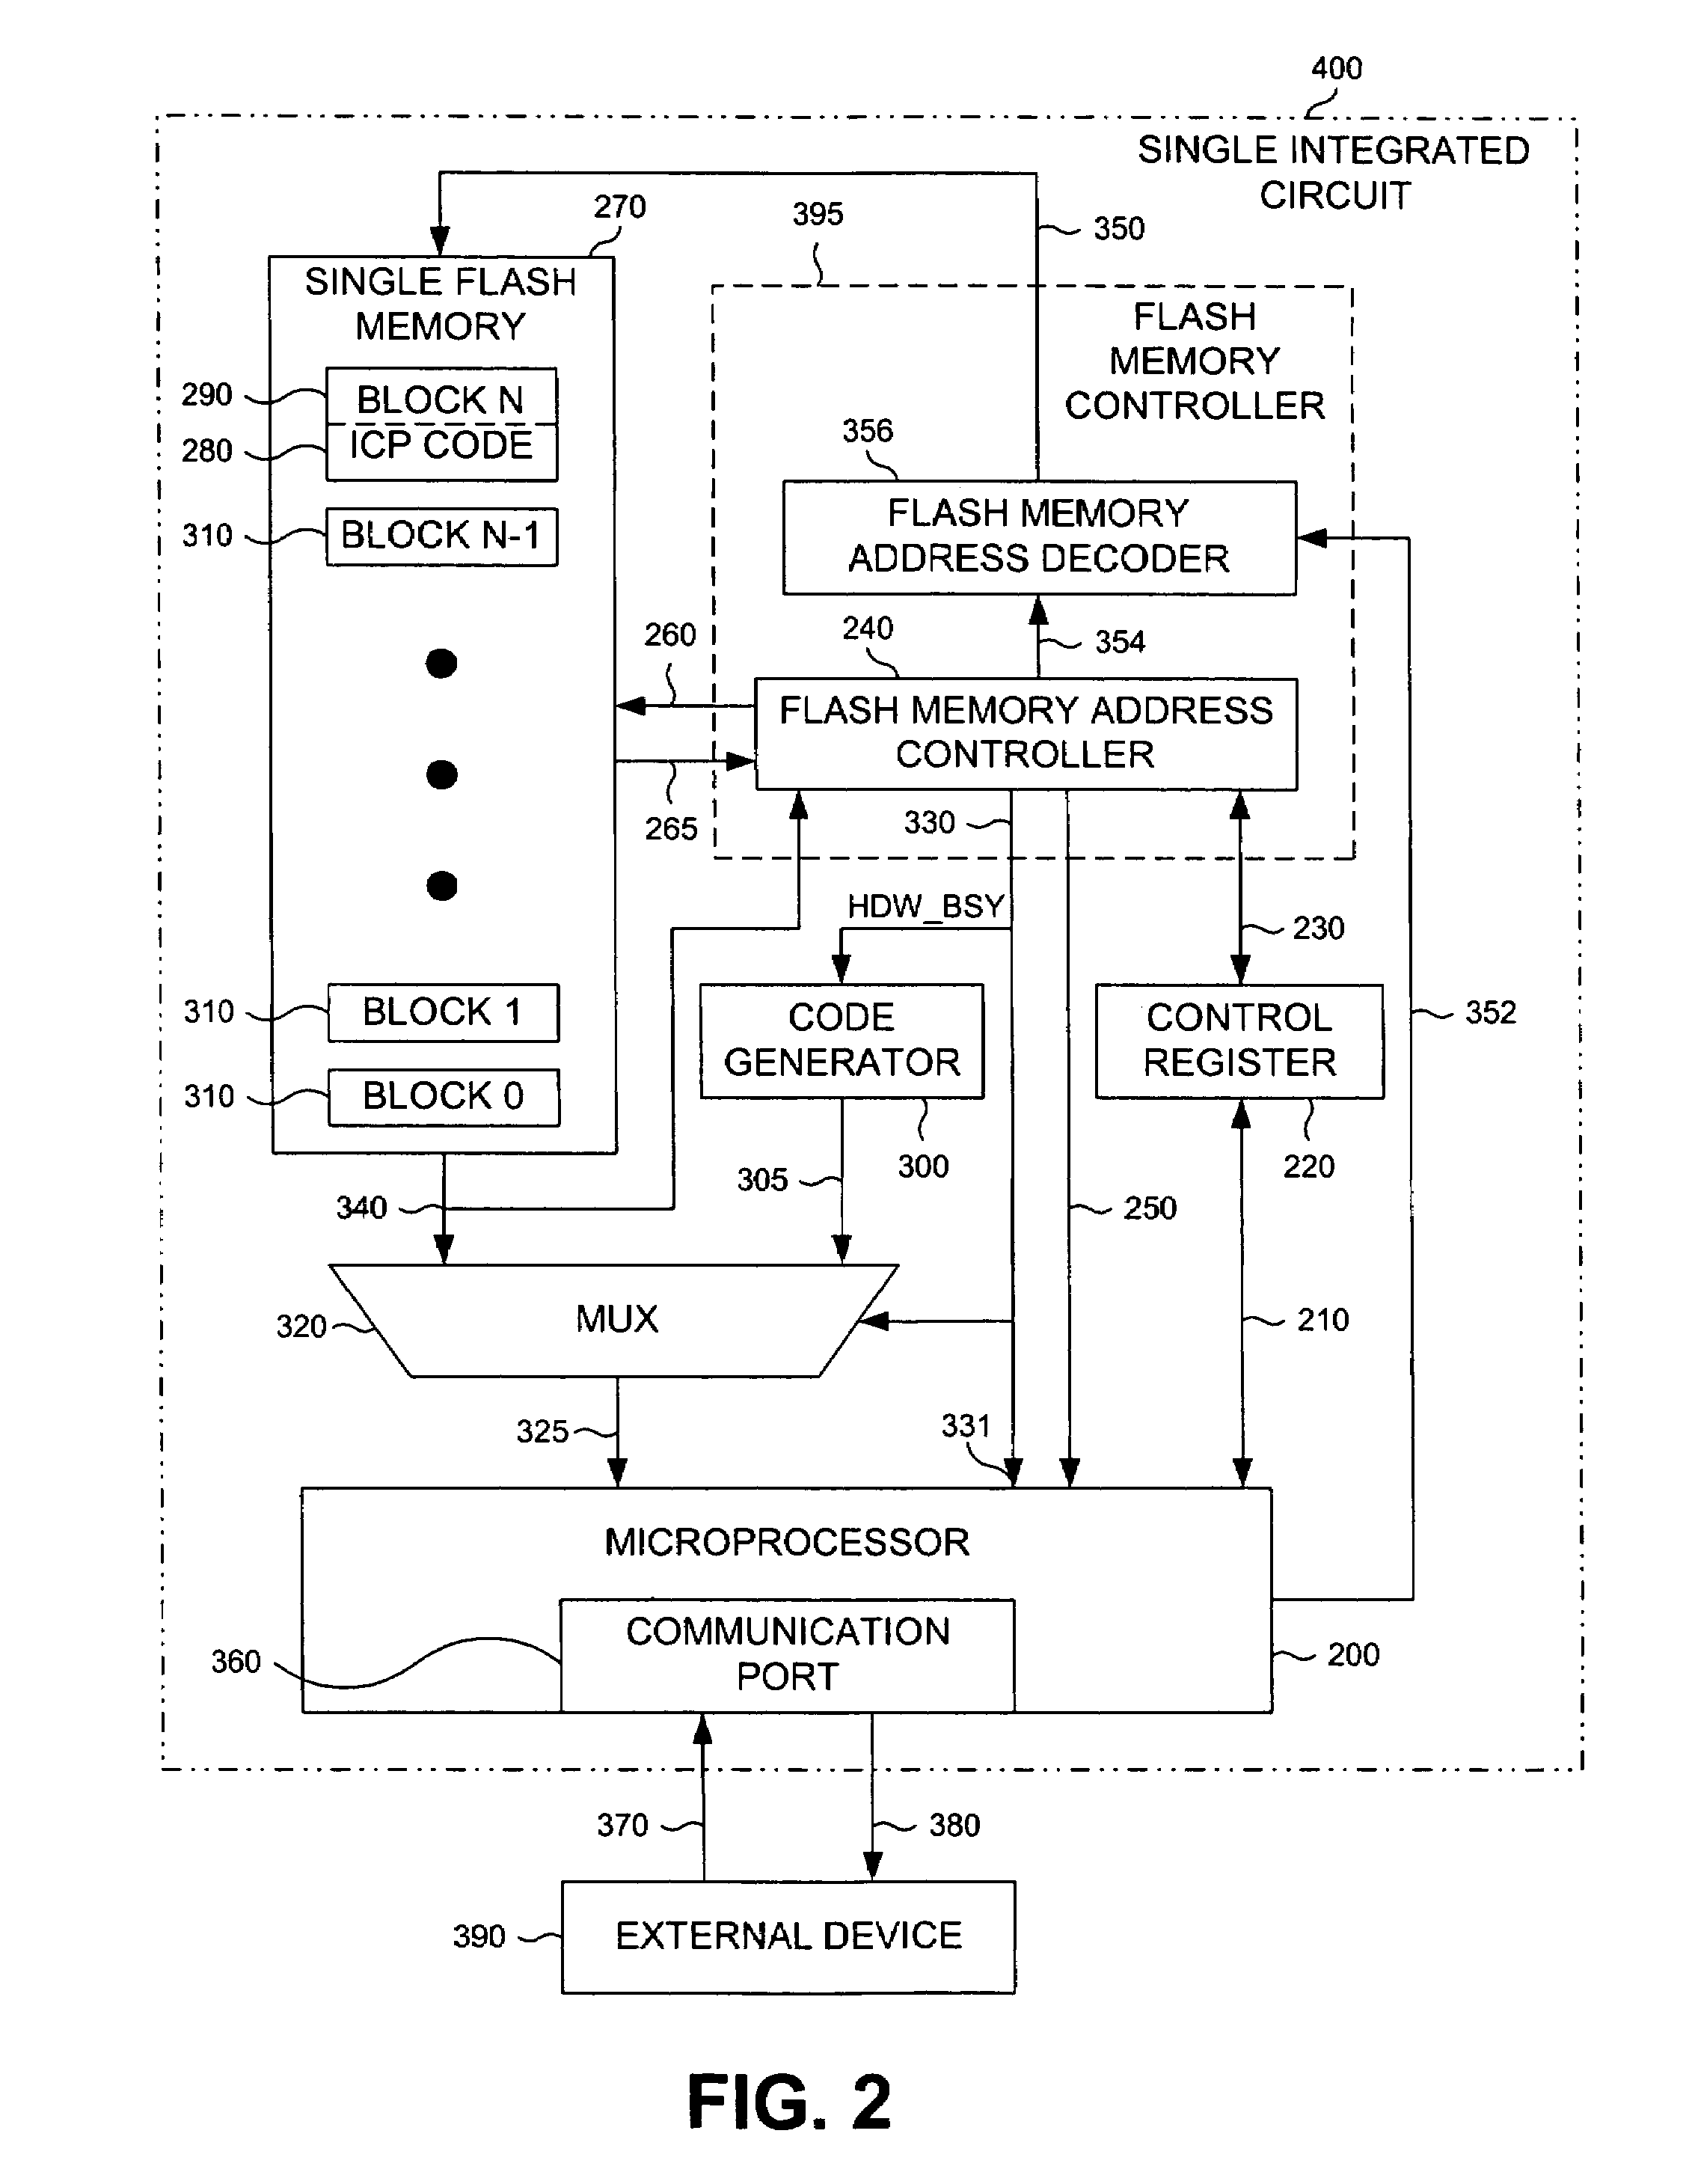 In-circuit programming architecture with processor, delegable flash controller, and code generator